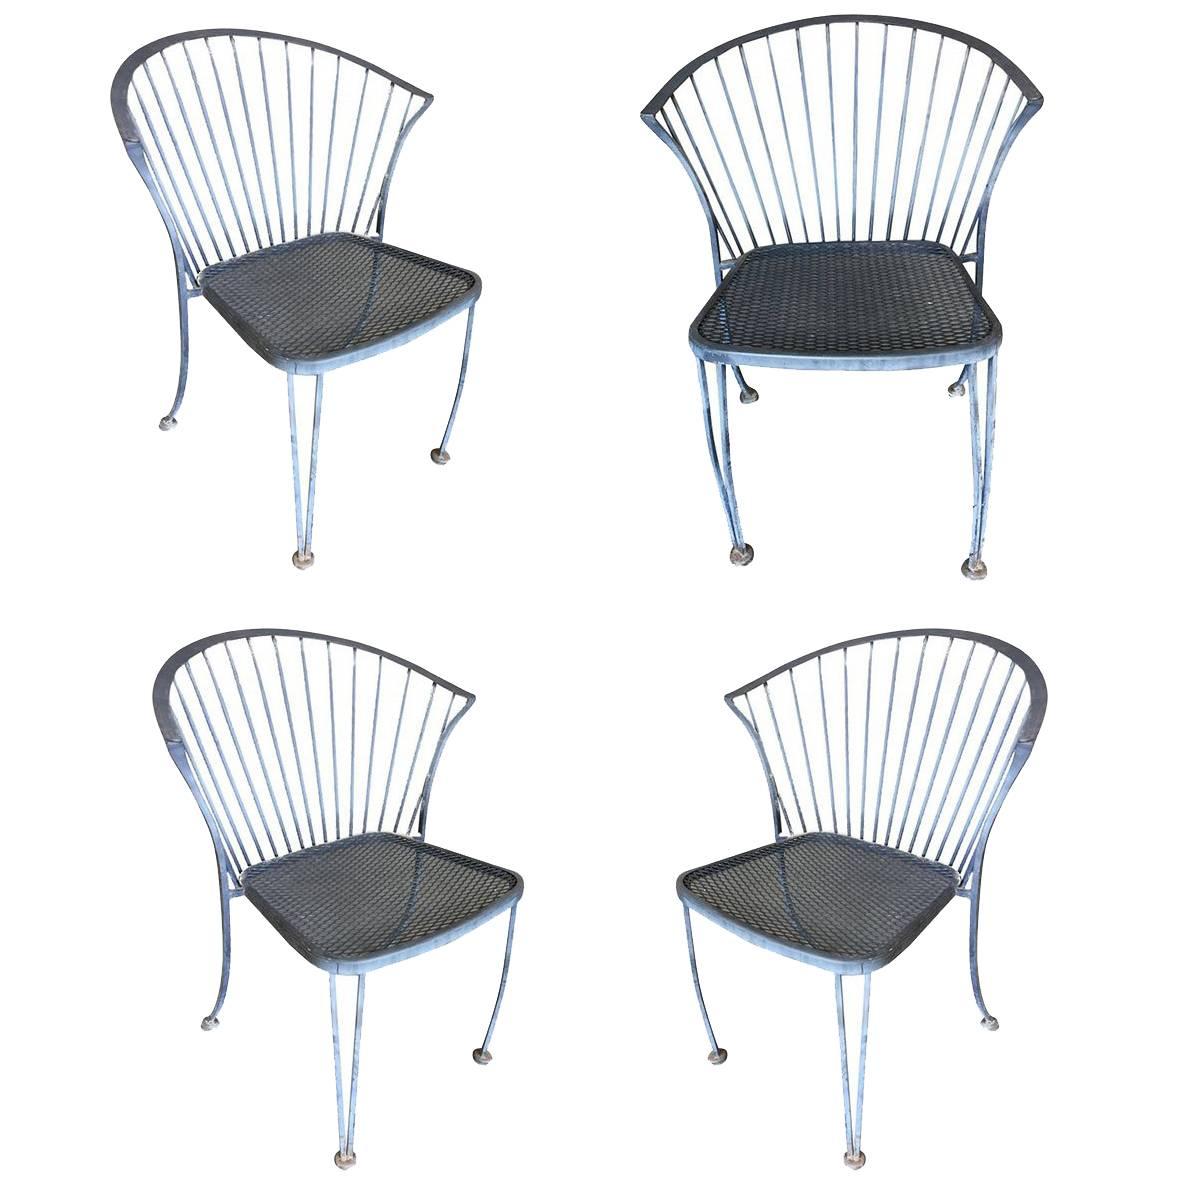 Woodard Pinecrest Iron Patio/Outdoor Lounge Chair, Set of Four